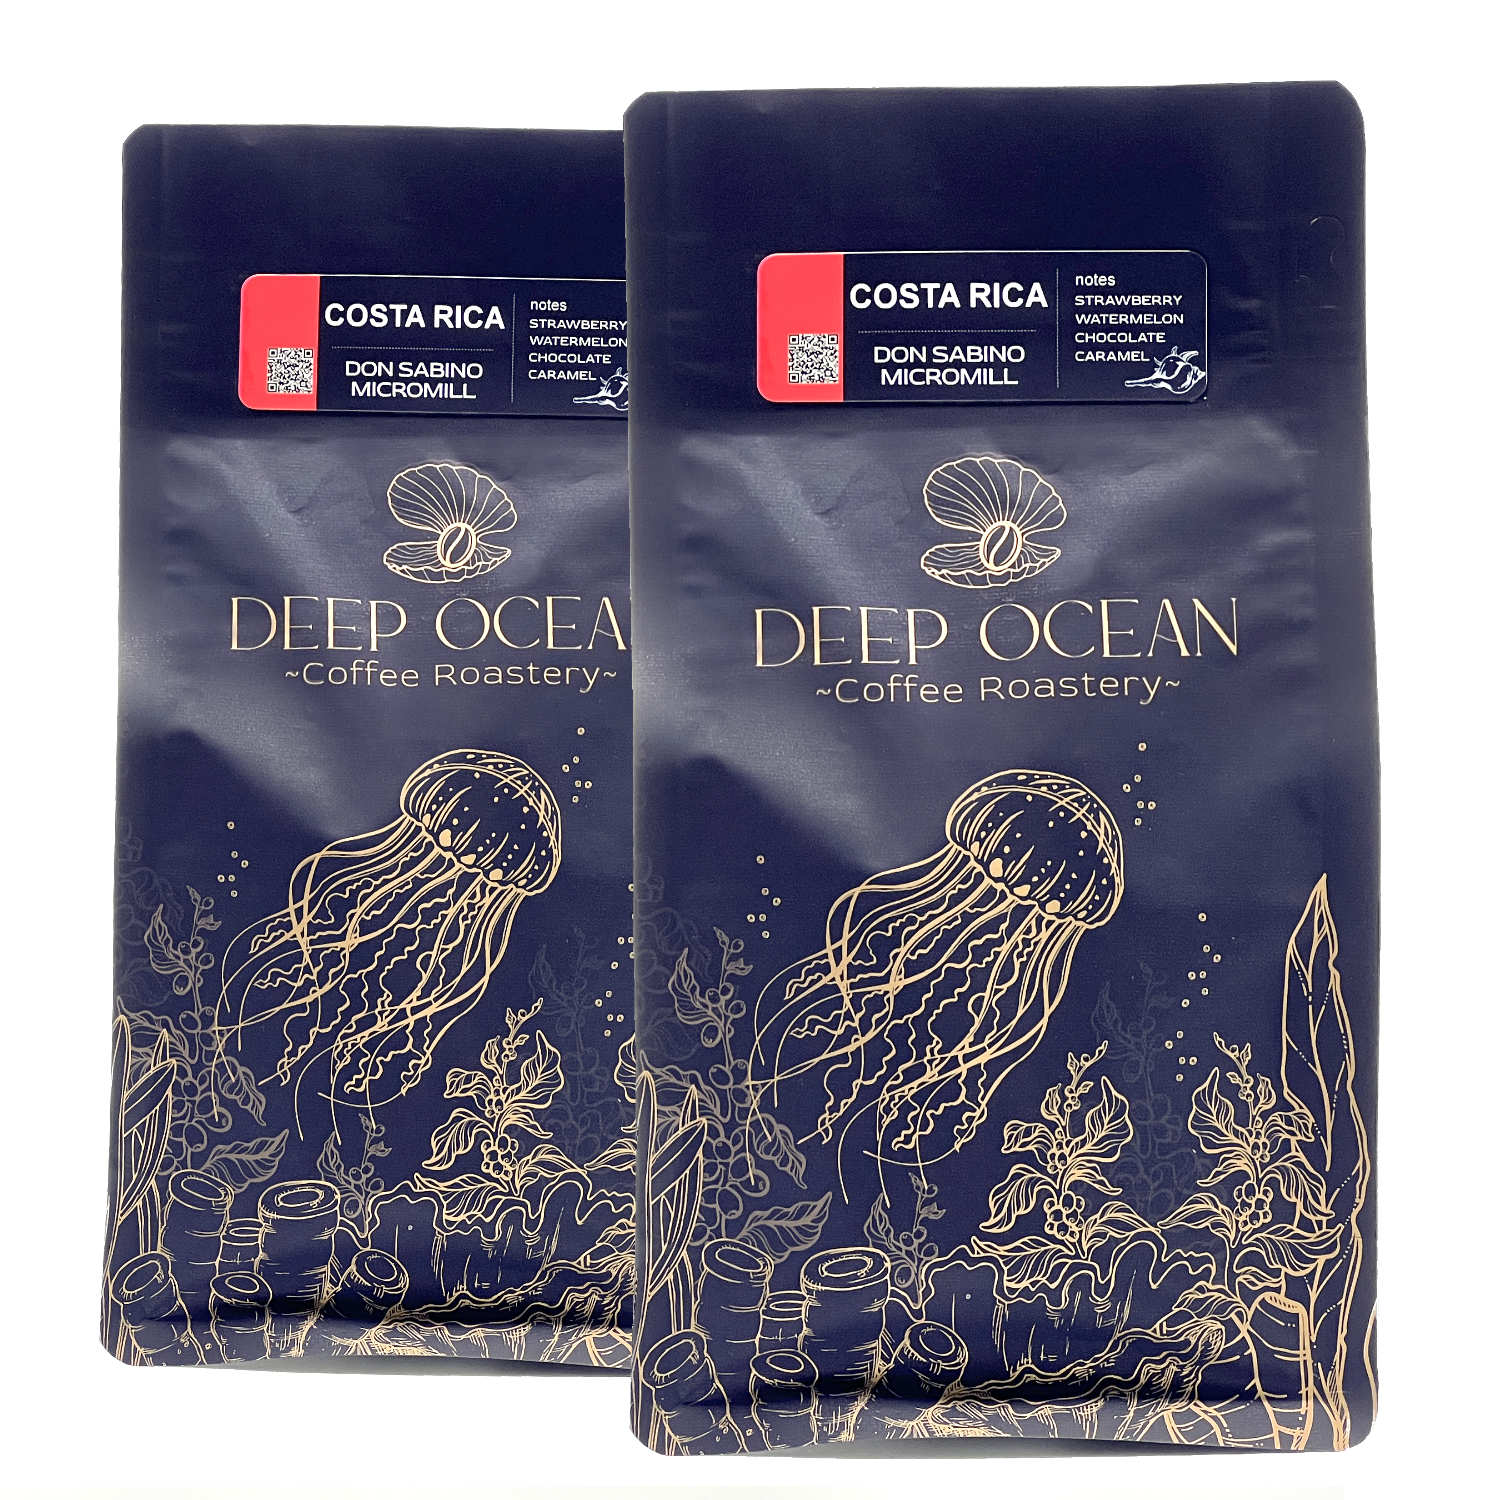 variant 2 - medium roasted coffee Costa Rica is great choice of specialty coffee.